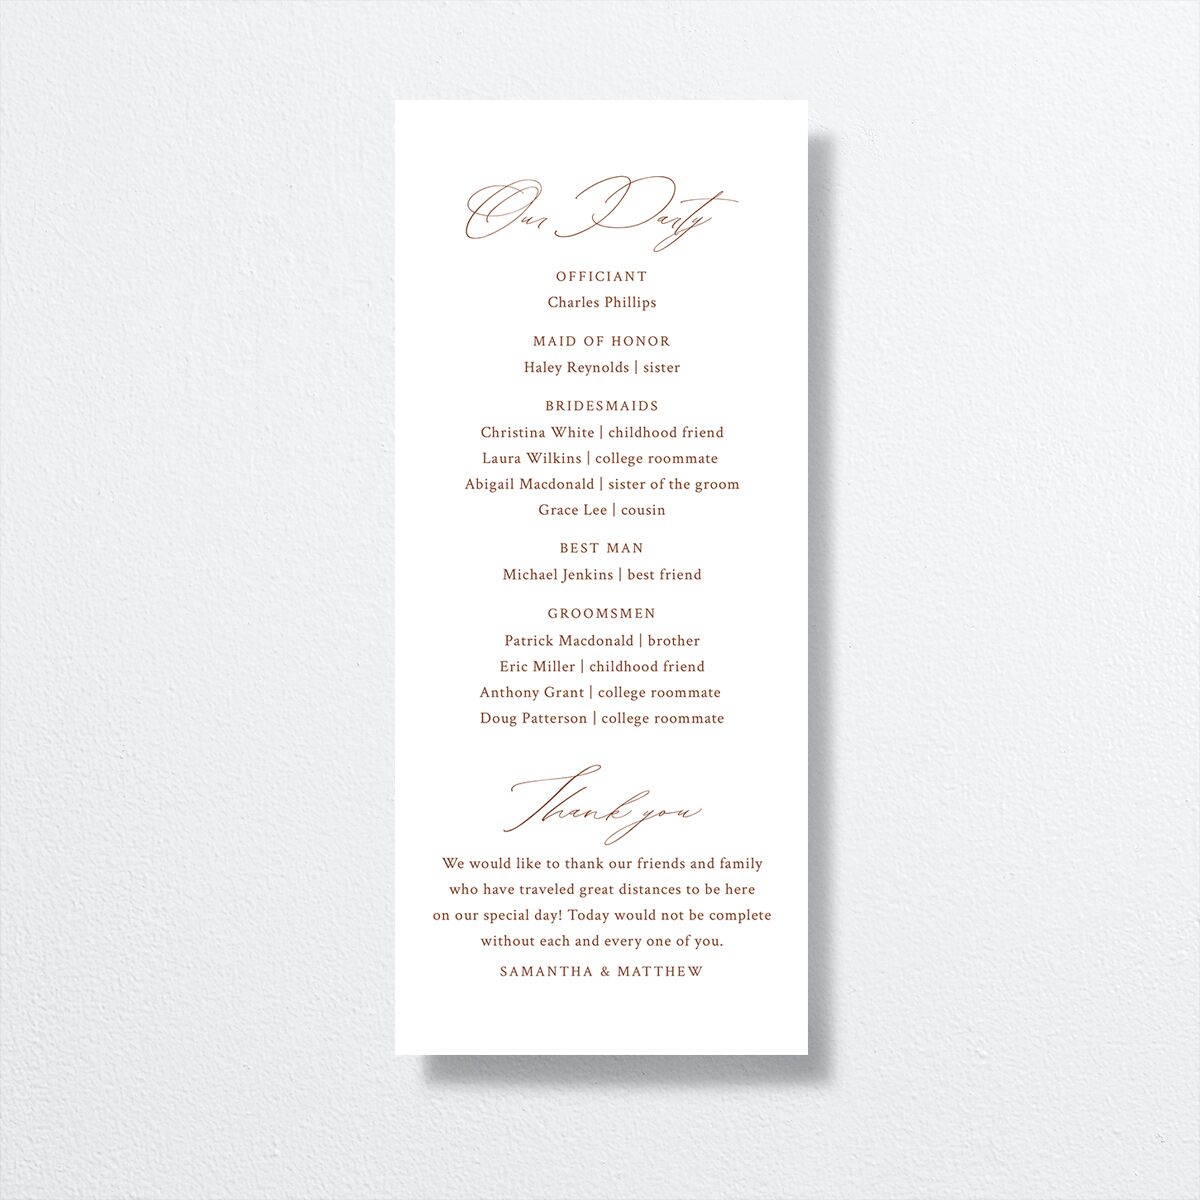 Rustic Branches Wedding Programs back in red